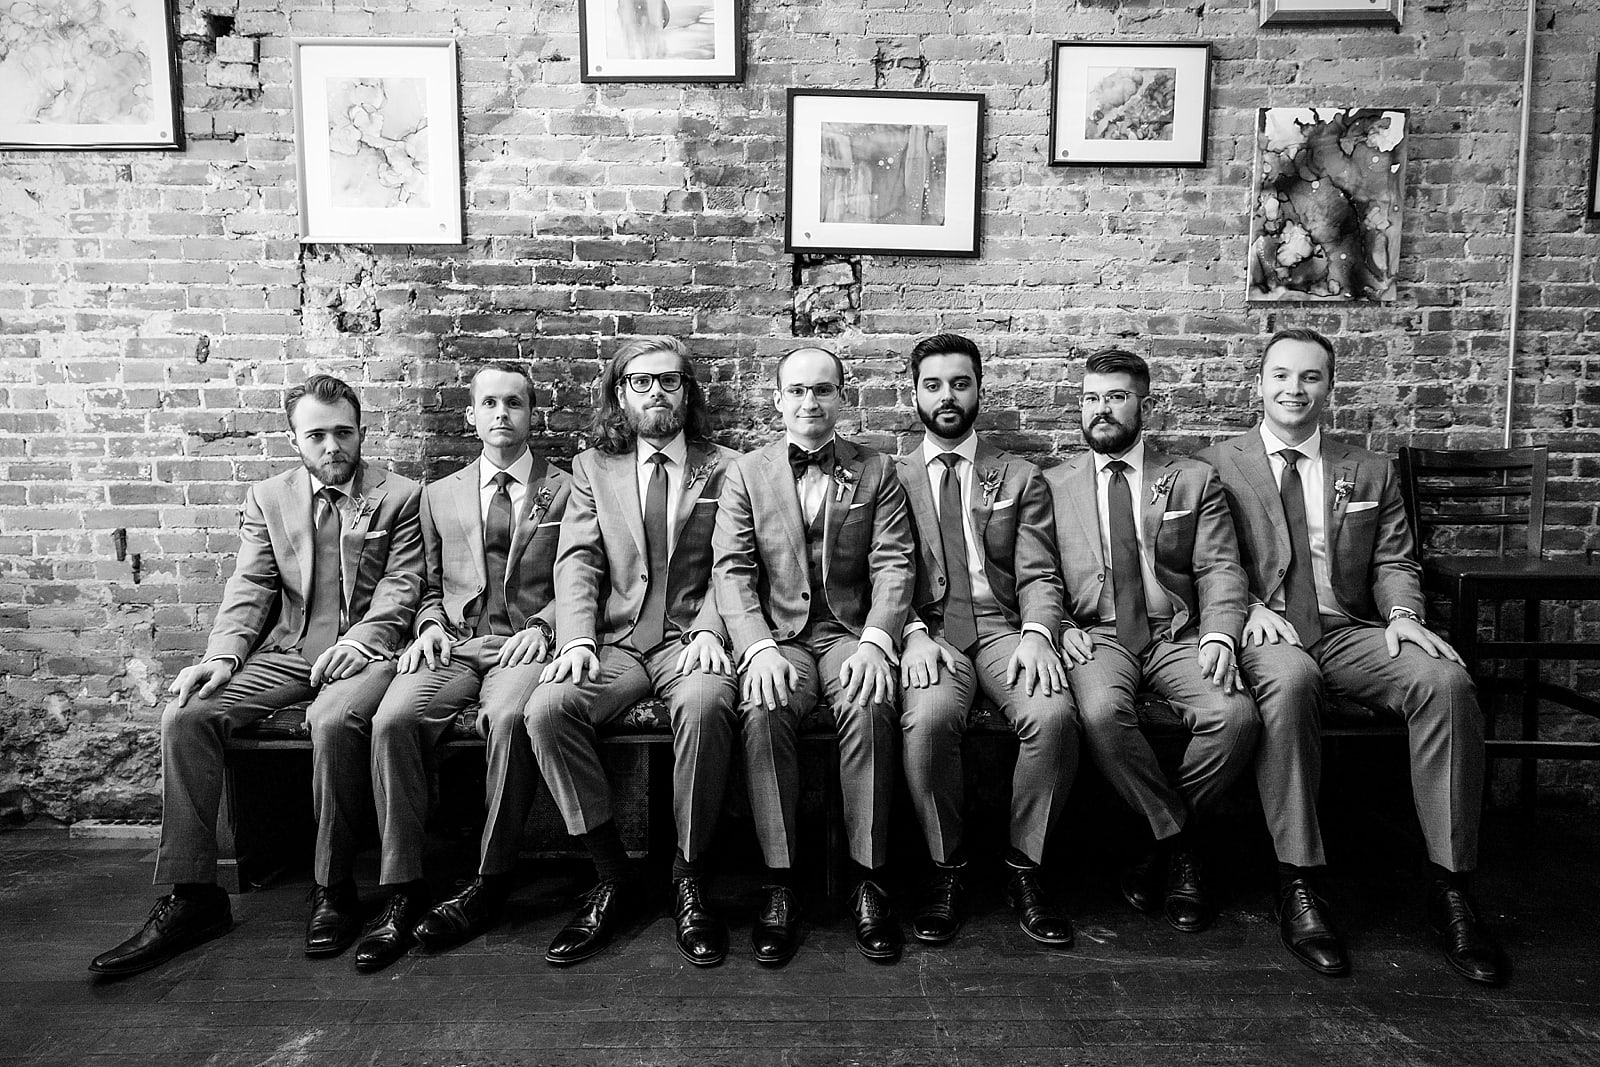 Black and white groomsmen portrait sitting on bench, college of physicians wedding